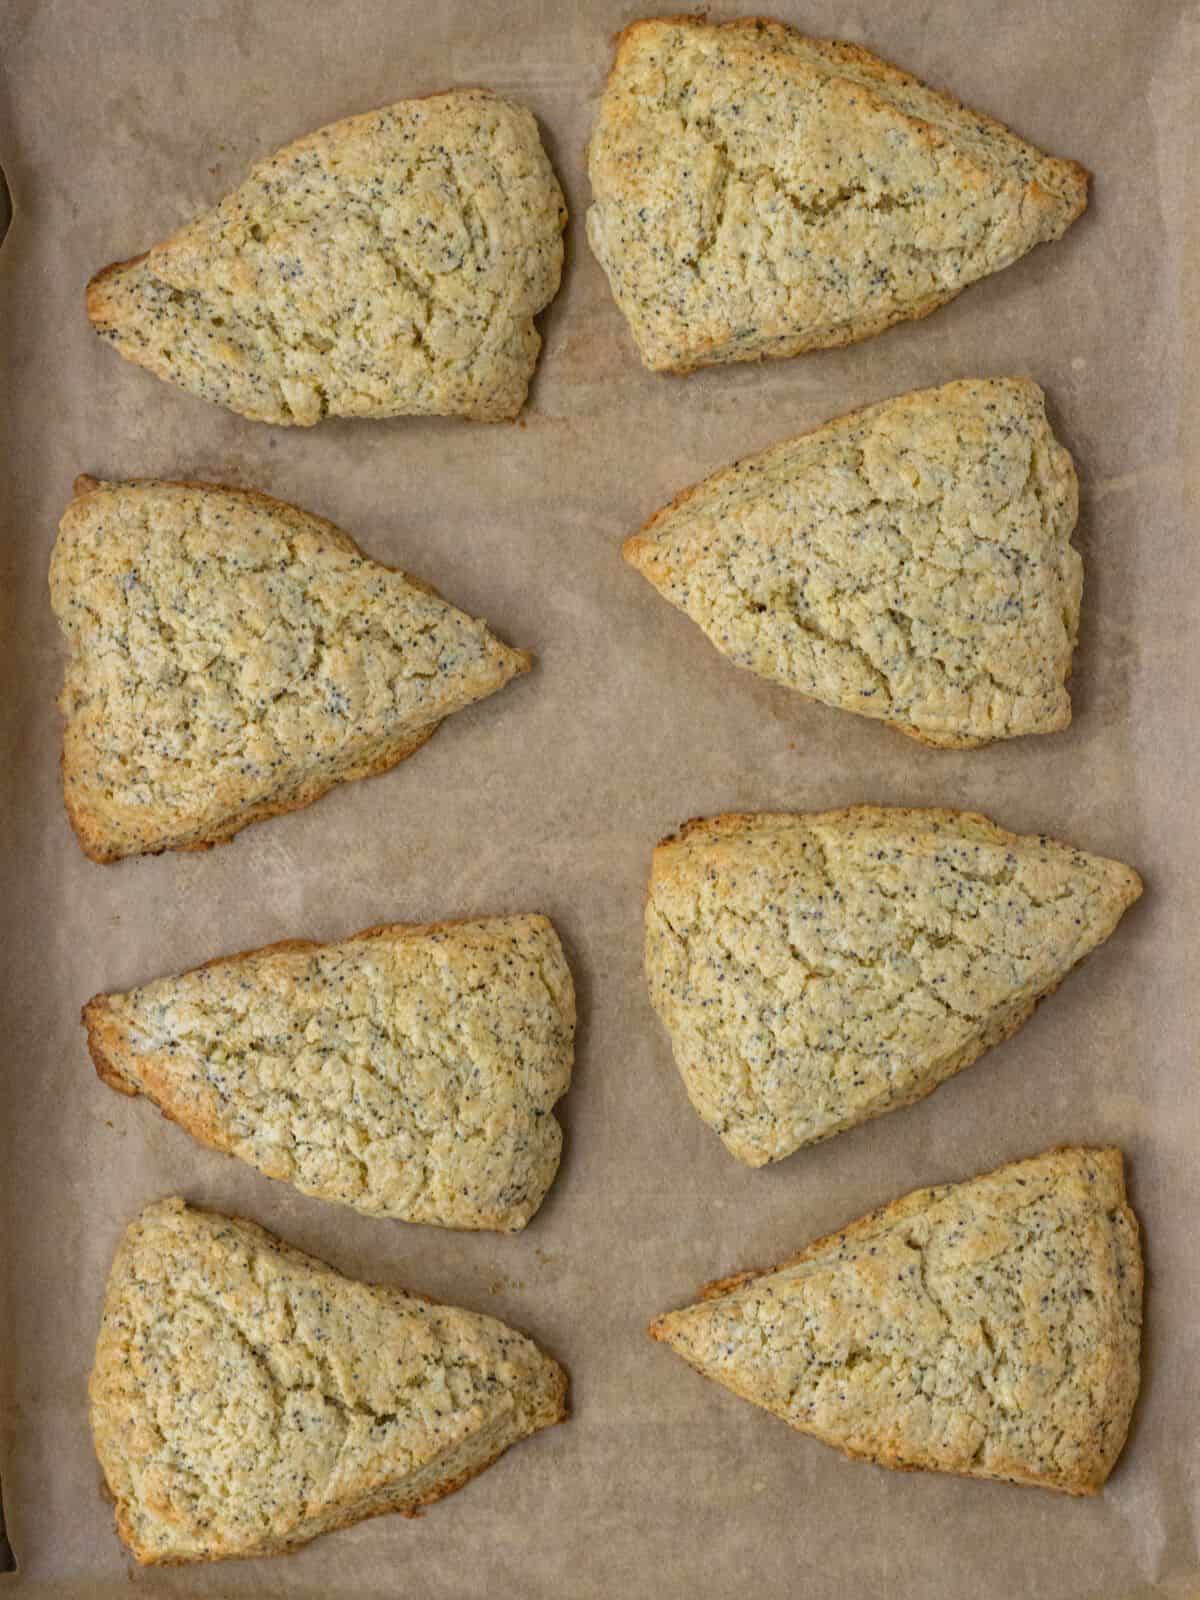 Lemon poppy seeds on a parchment-lined baking sheet after bakings.